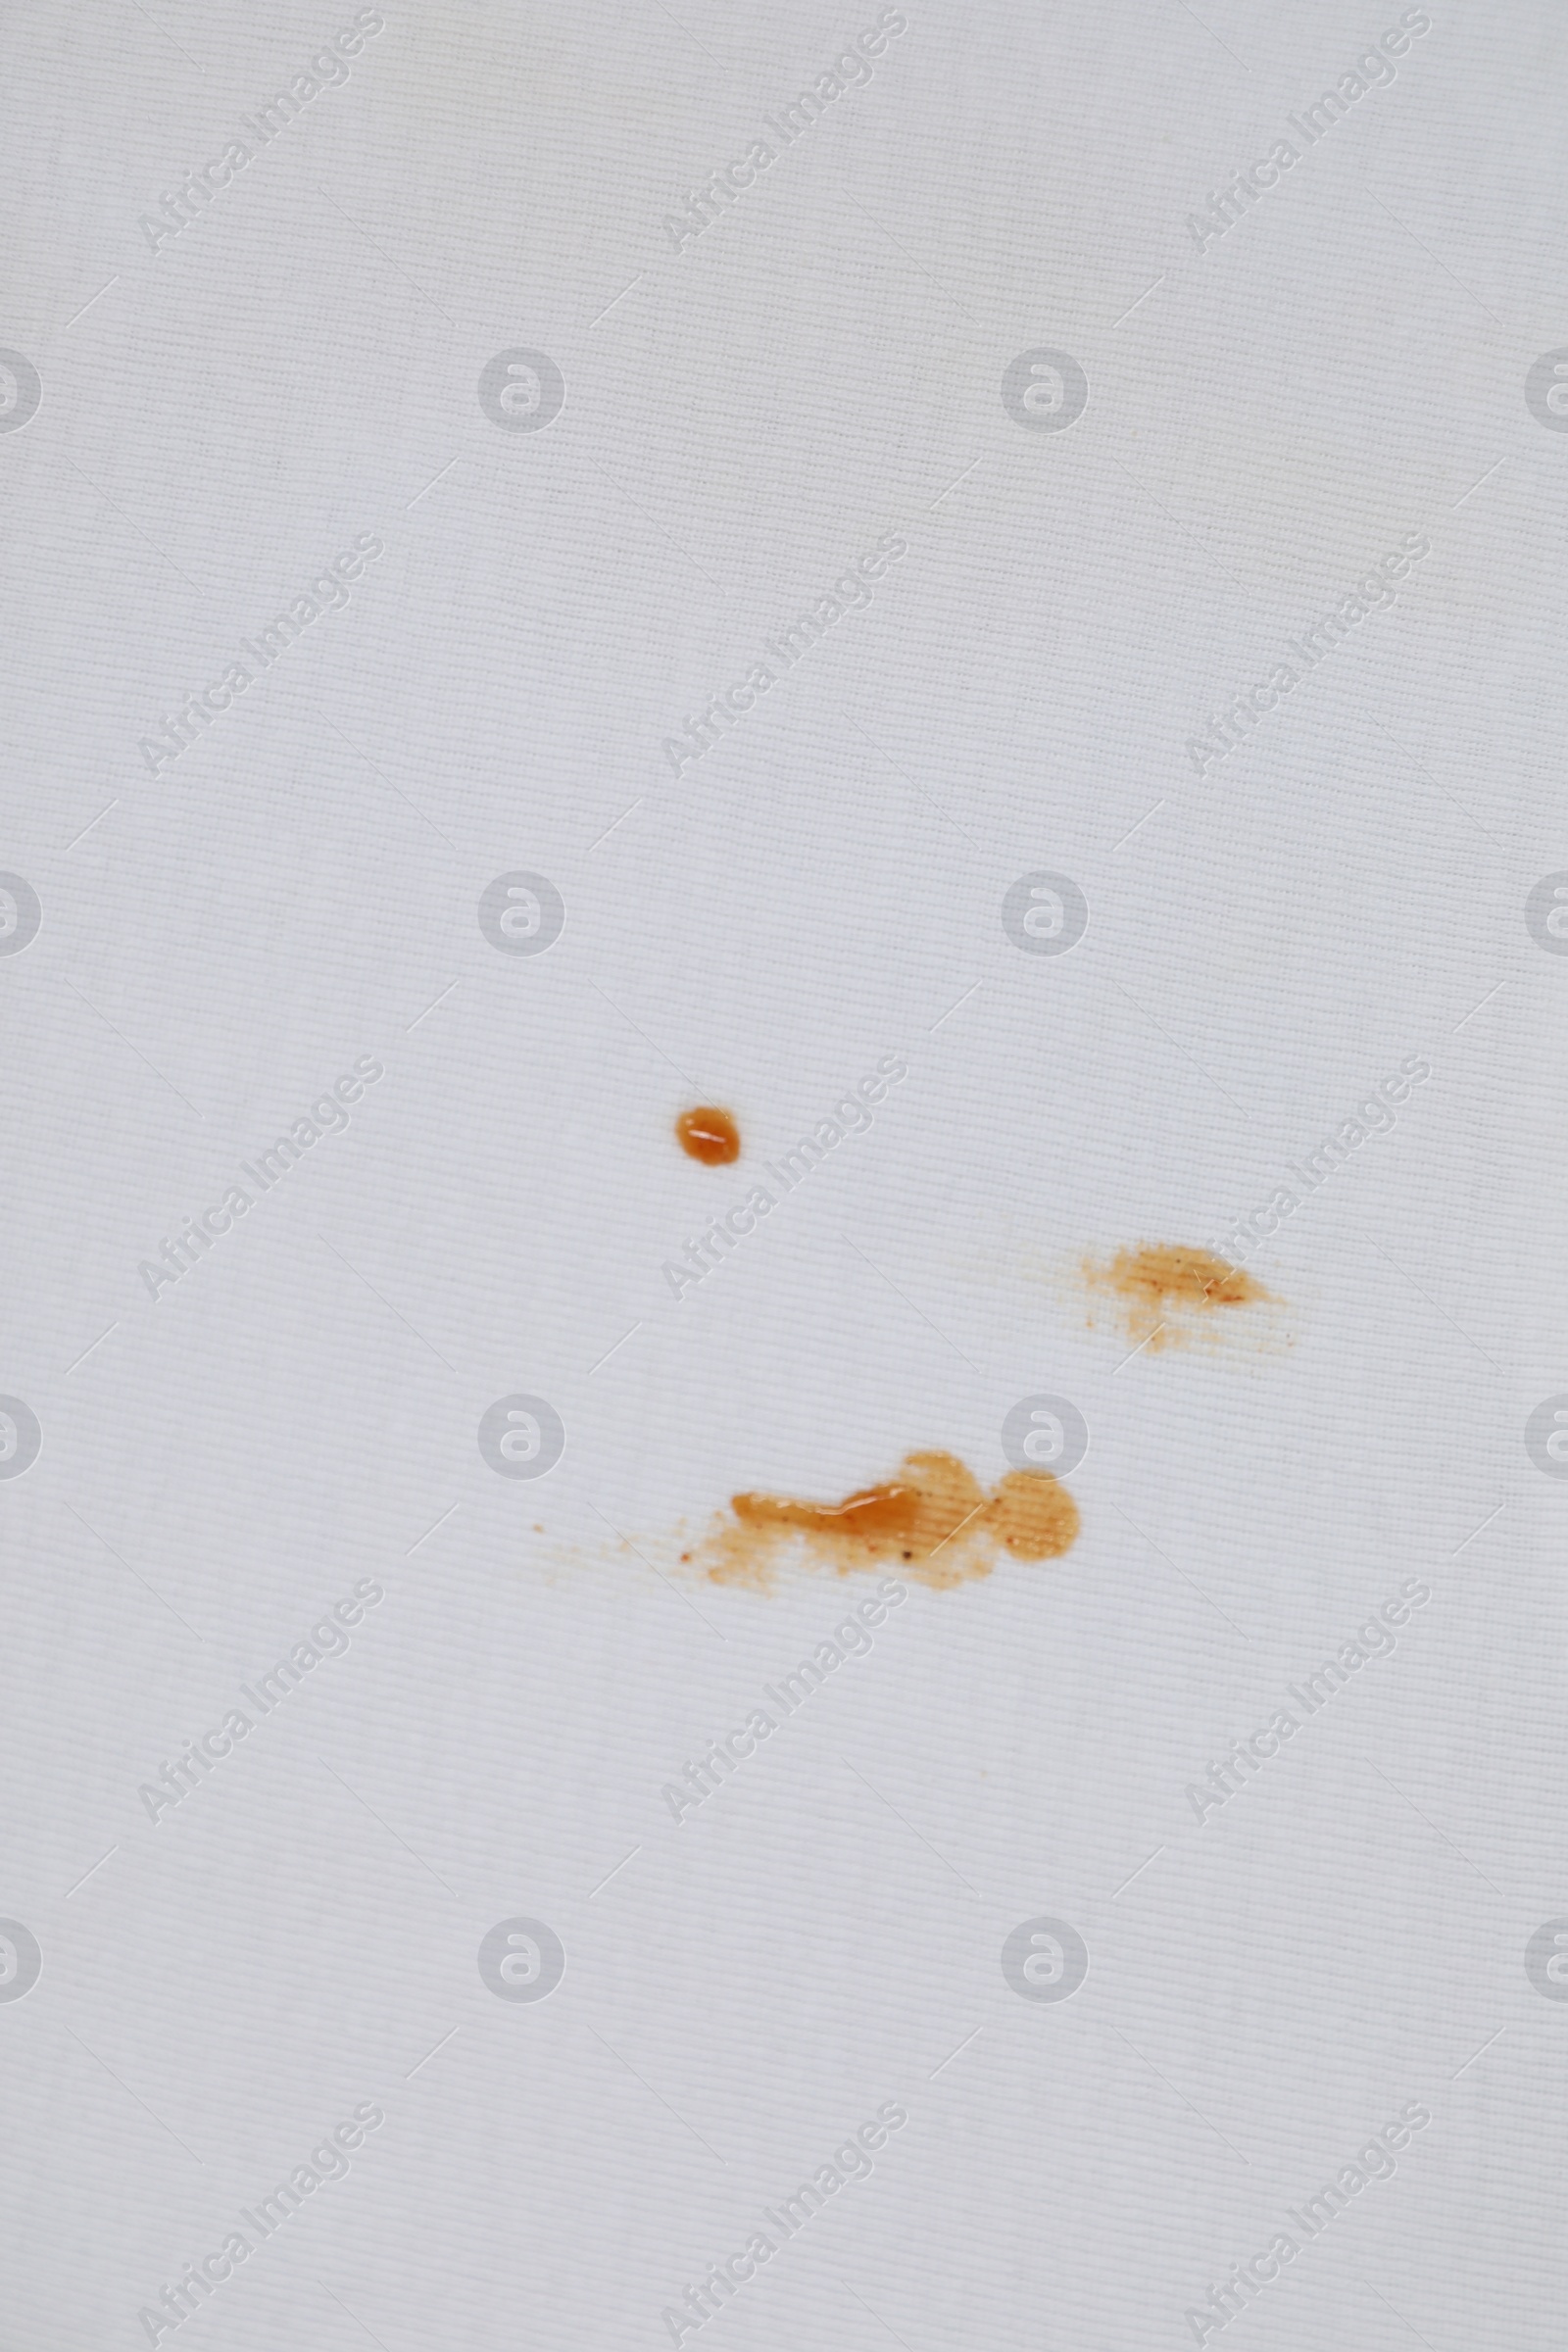 Photo of Stains of sauce on white fabric, top view